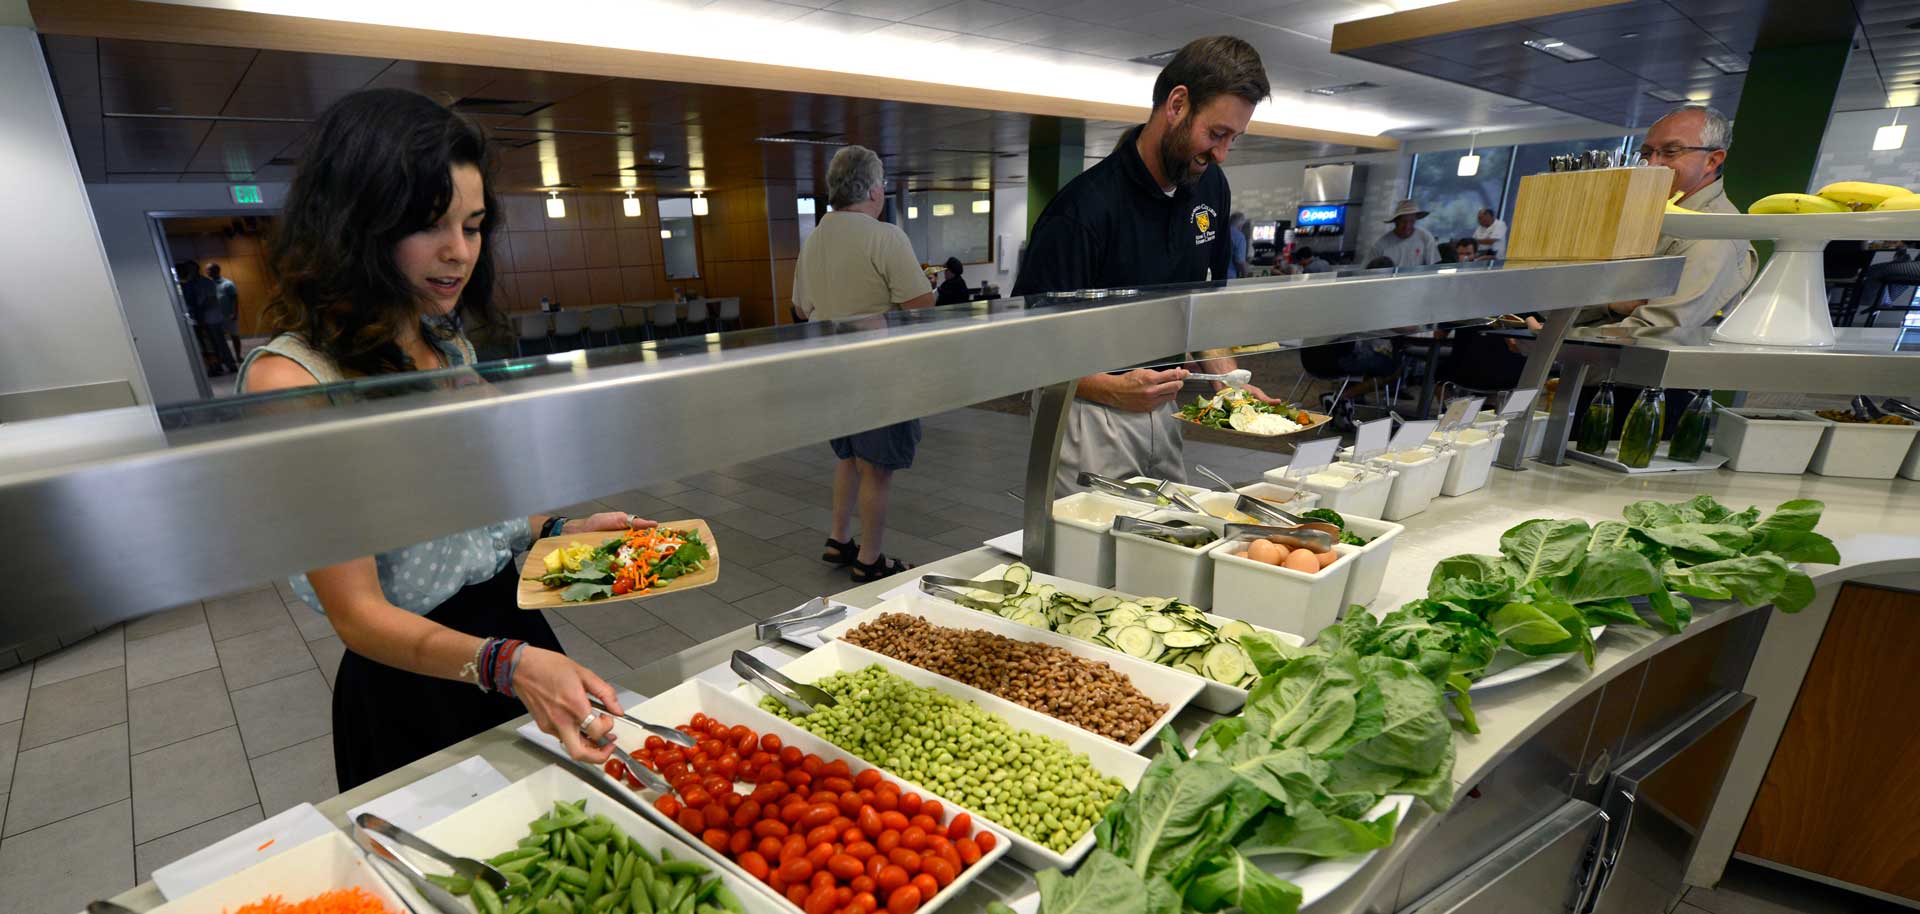 Students, faculty, staff and visitors flock to CC's cafeteria, Rastall Cafe. Some produce at the salad bar is harvested from the student garden. 